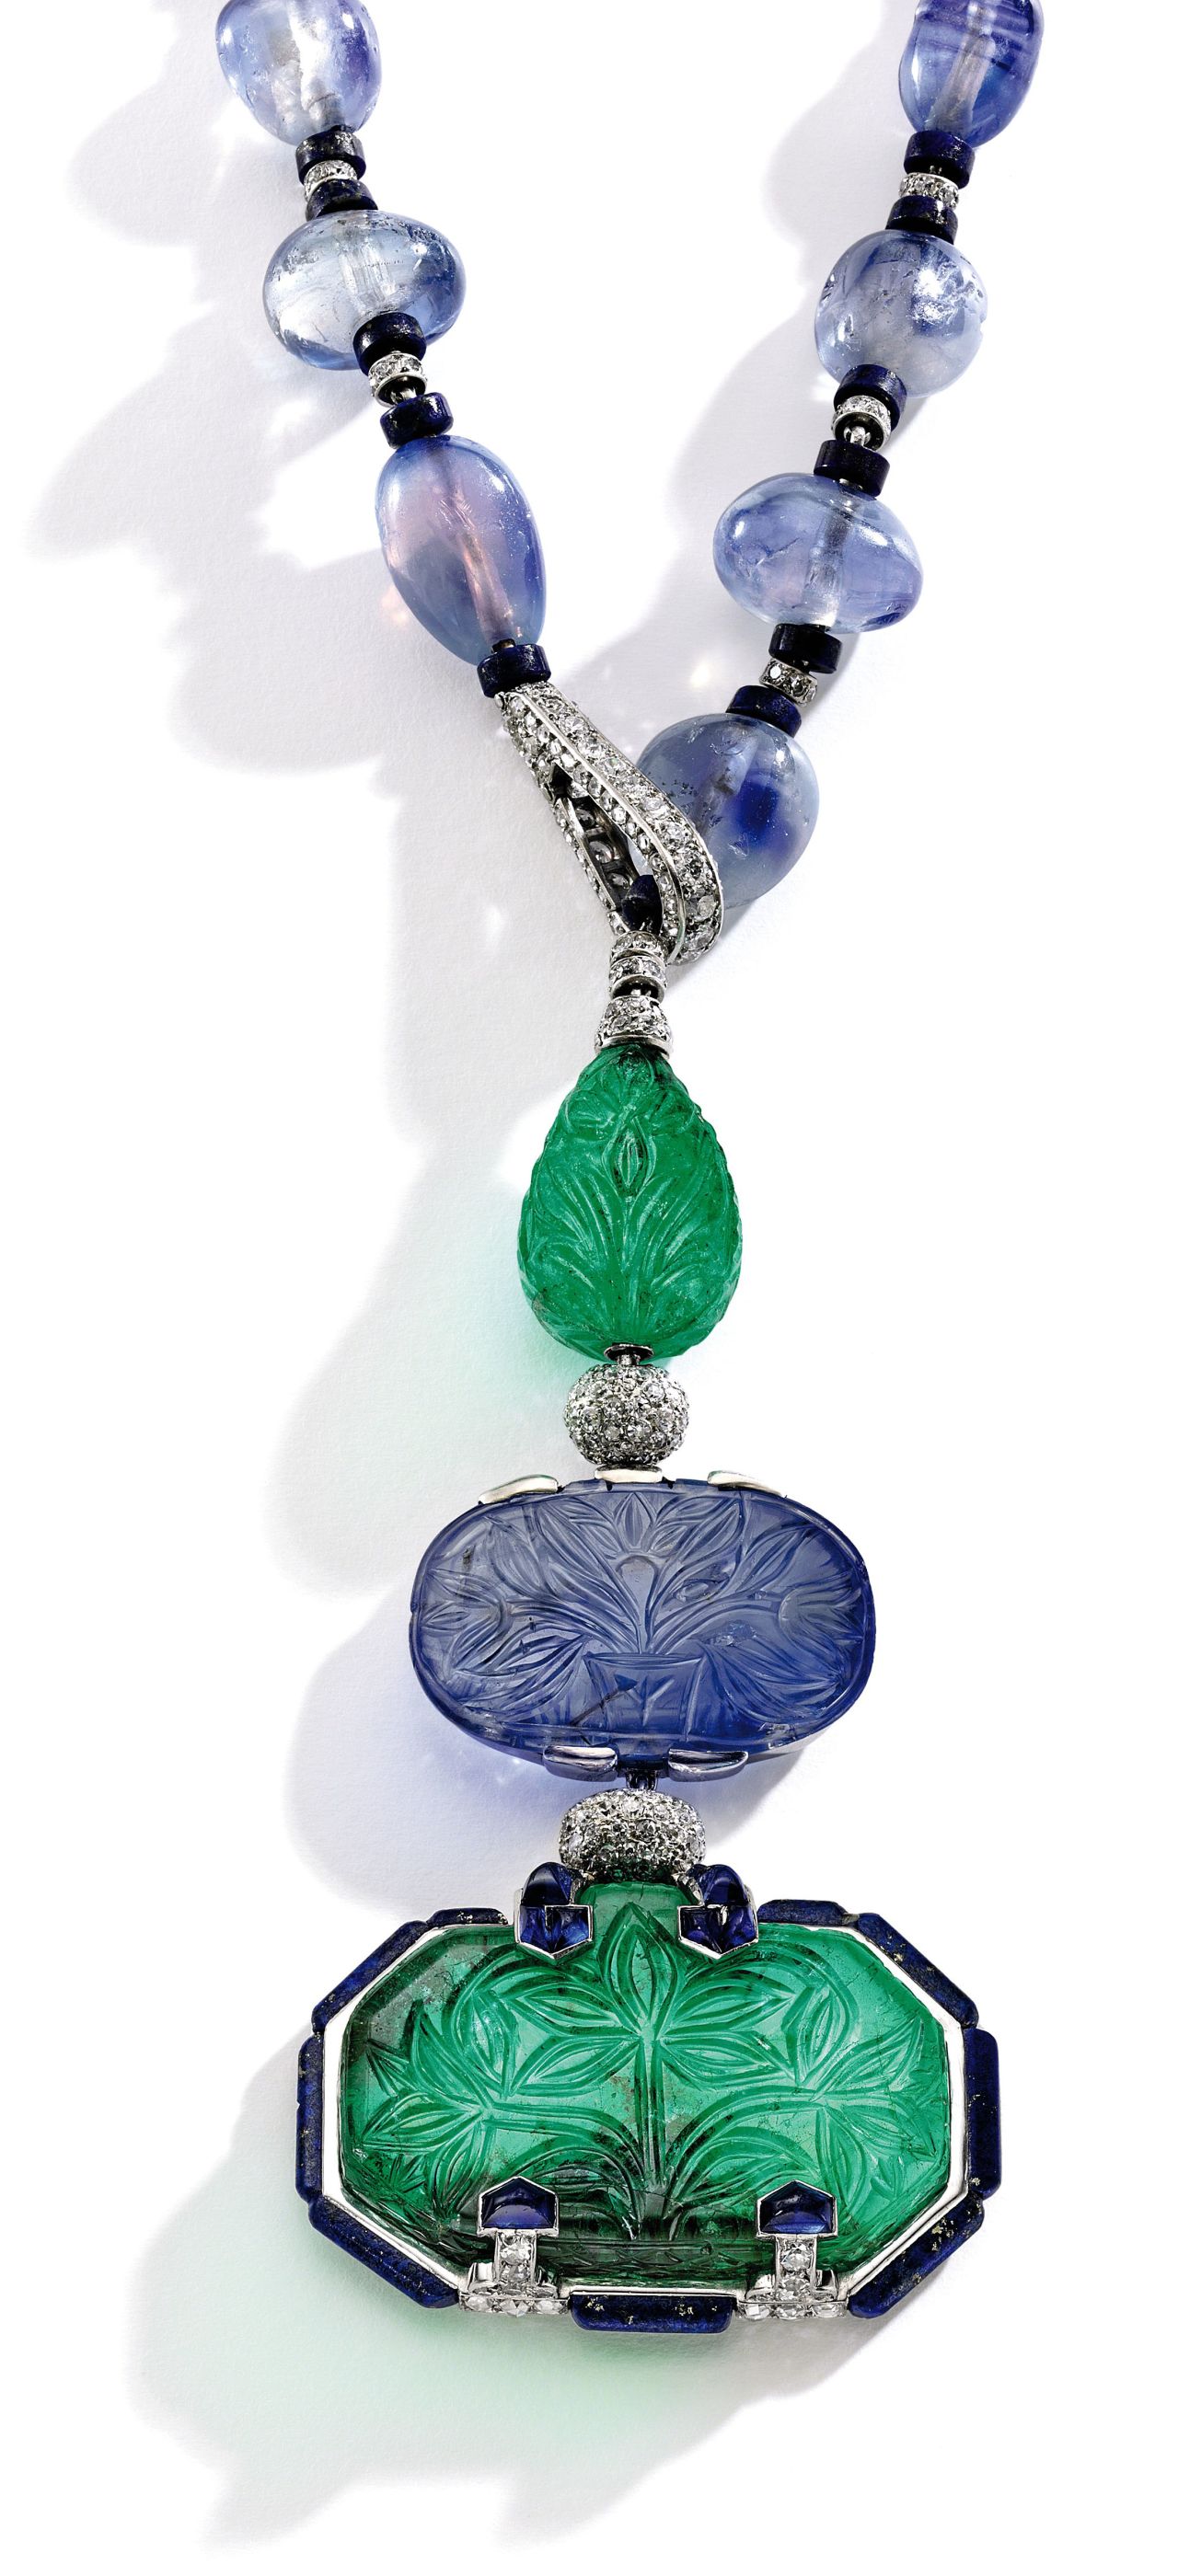 This Mughal Empire-inspired necklace -- a combination of platinum, emerald, sapphire, lapis and diamond -- was recently part of the <a href="http://denverartmuseum.org/exhibitions/brilliant-cartier-20th-century" target="_blank" target="_blank"><em>Brilliant: Cartier in the 20th Century</em></a> exhibition at the Denver Art Museum. Tuesday's buyer paid $2.6 million.